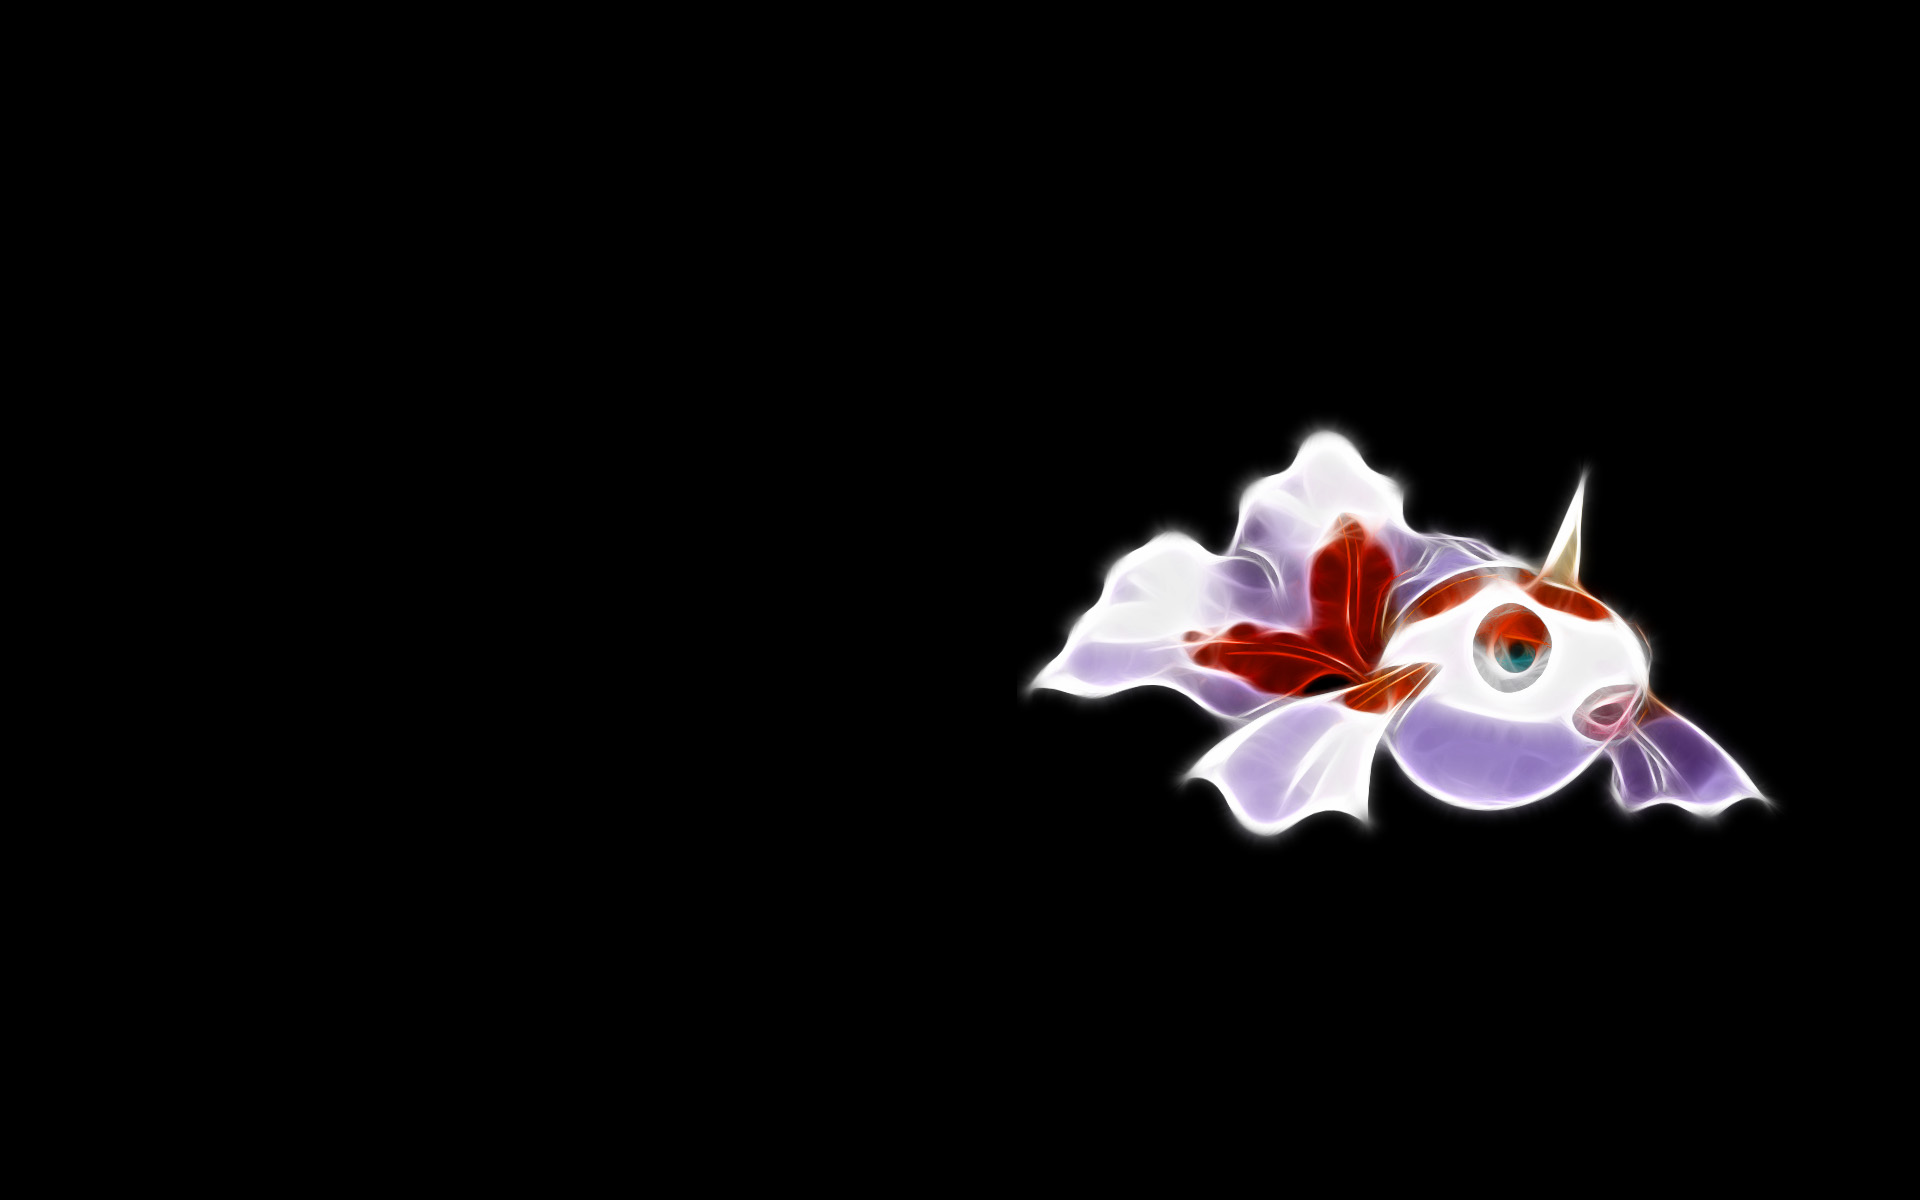 Goldeen, the water Pokémon from Pokémon anime, gracefully swimming in the depths.